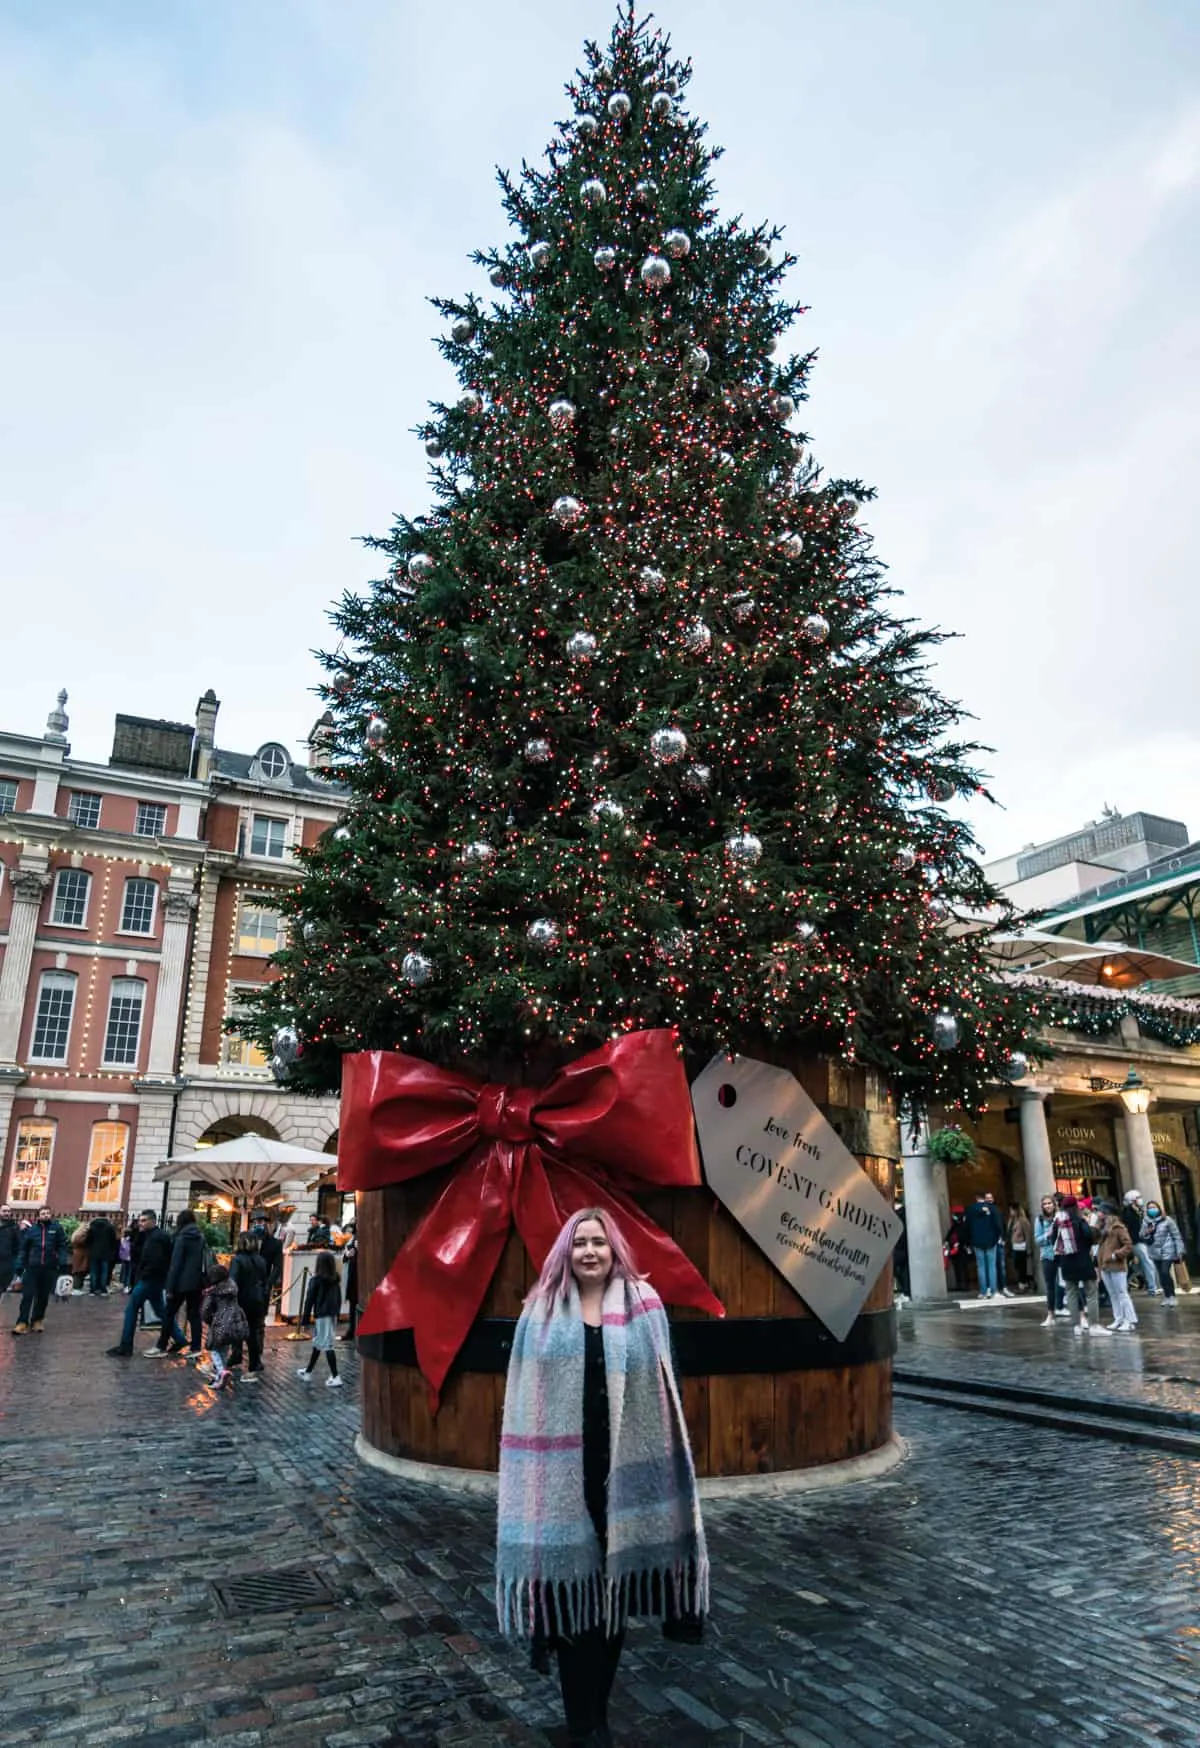 Christmas tree in Covent Garden